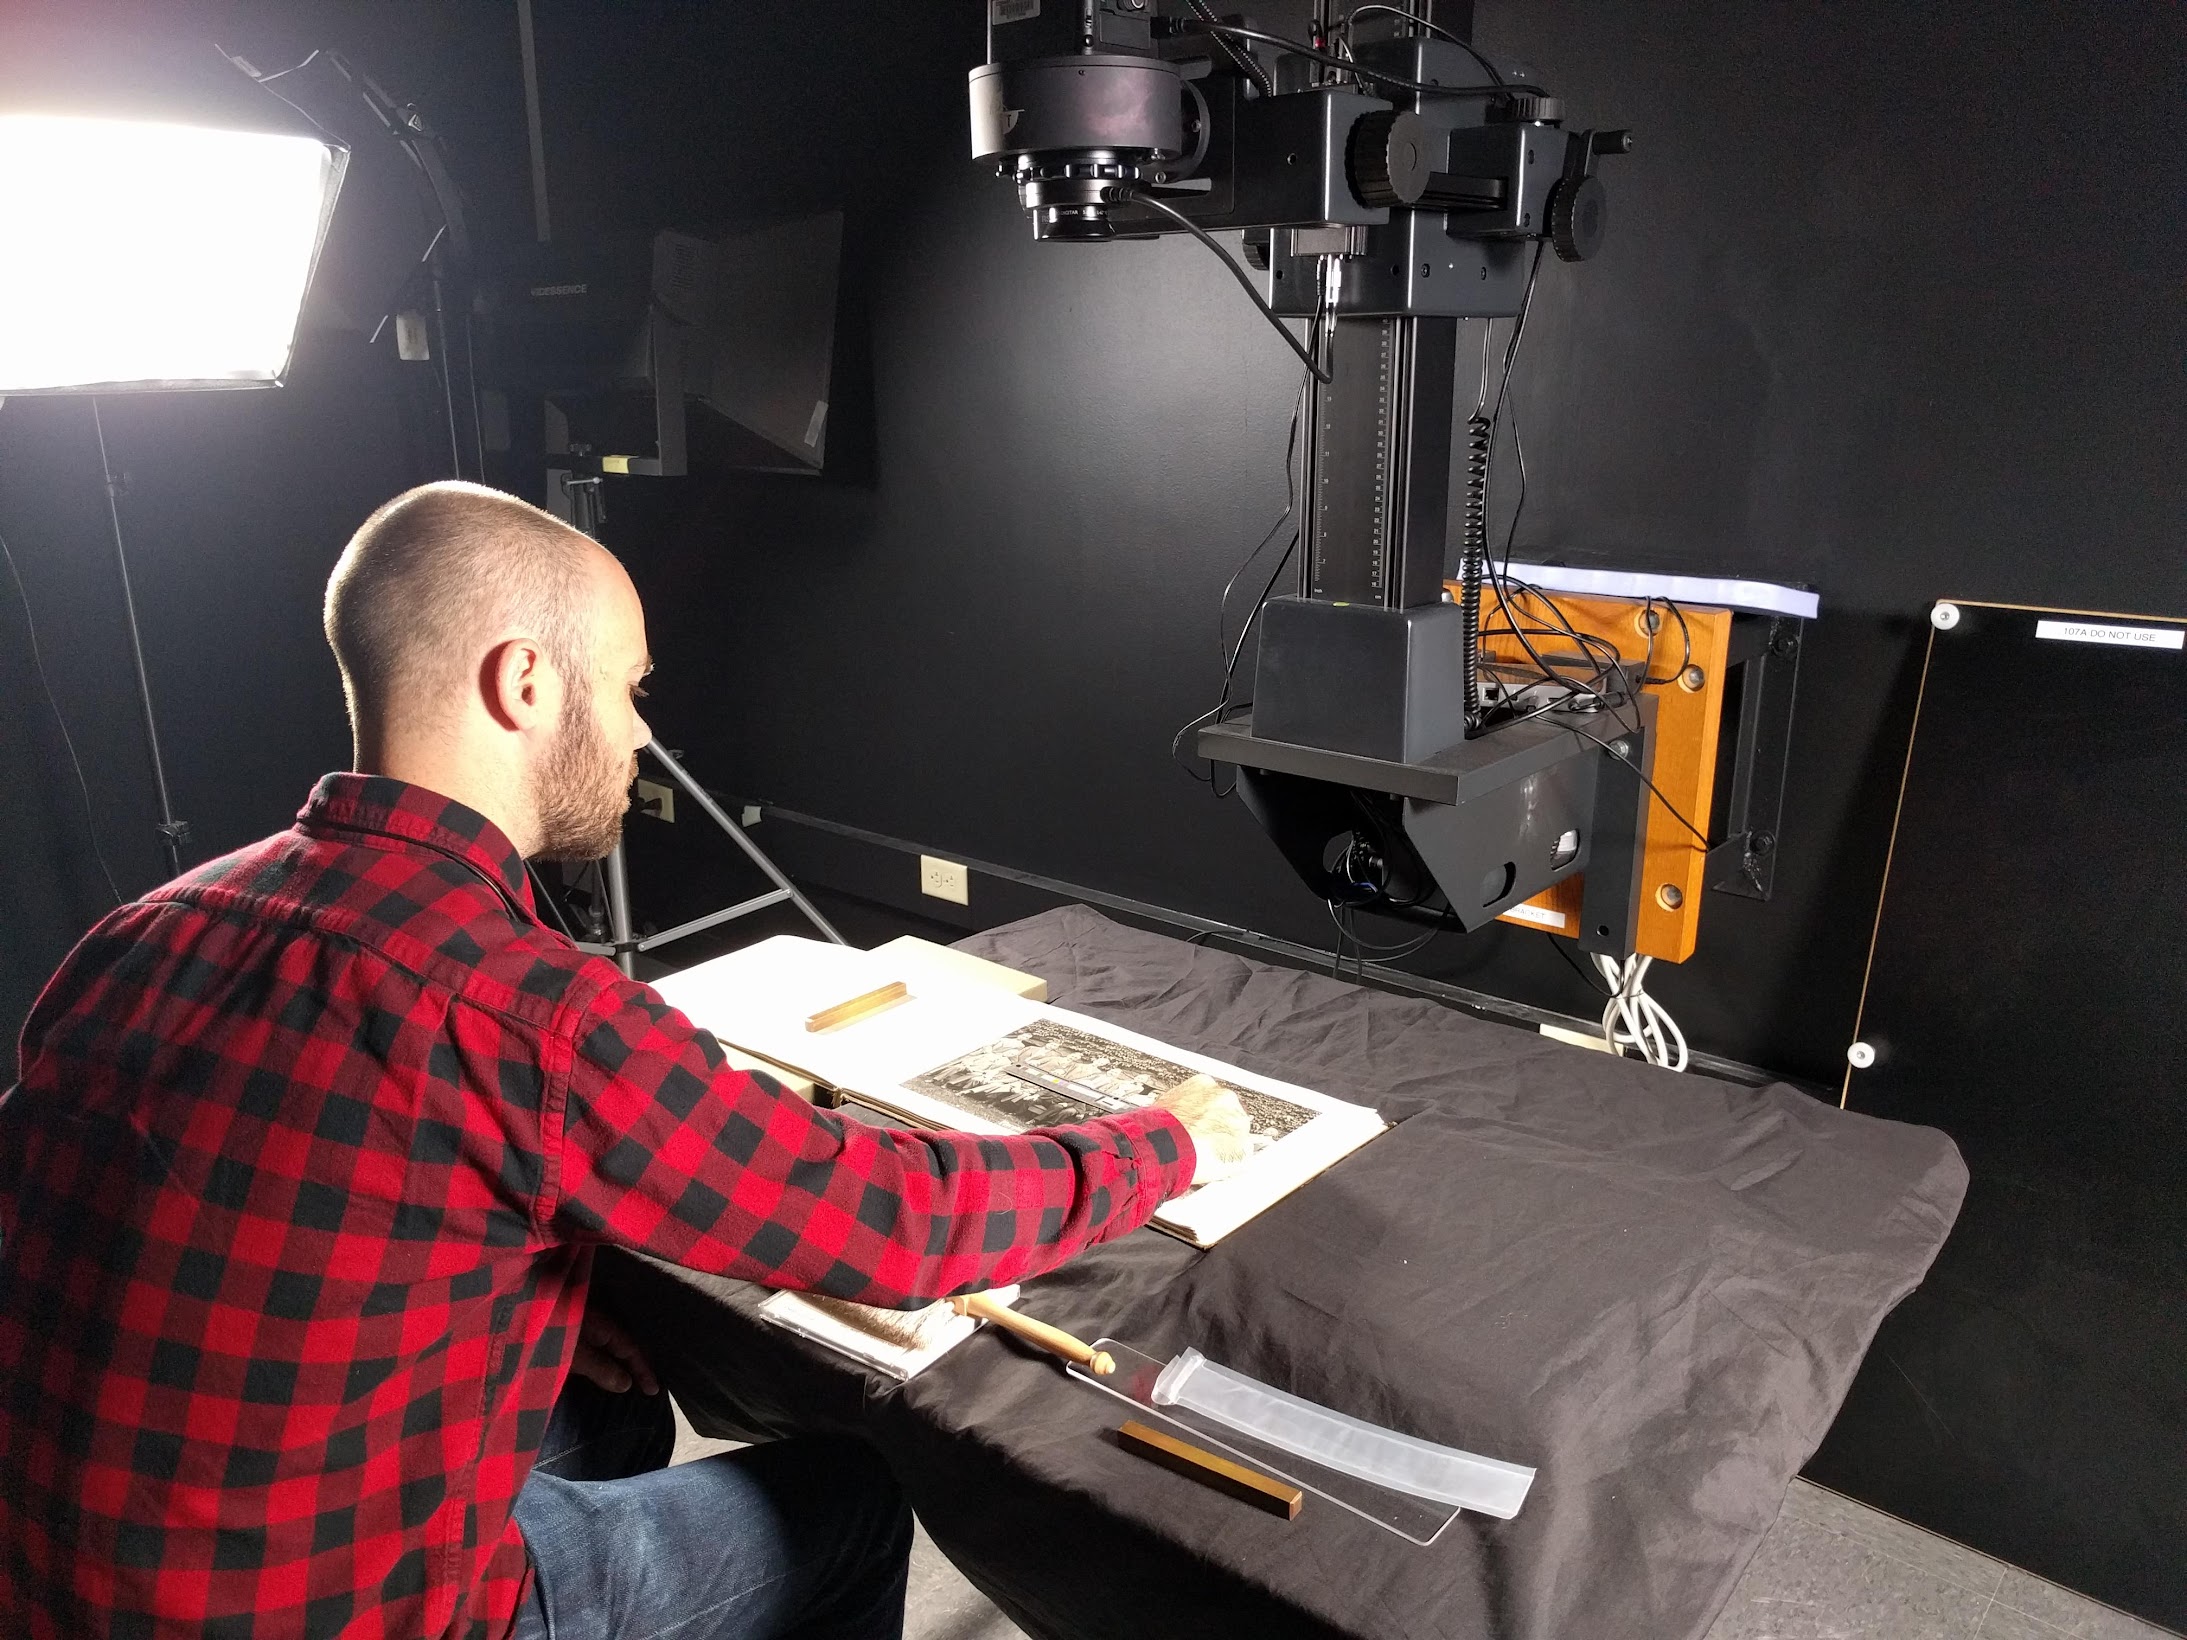 A library staff member is digitizing a book